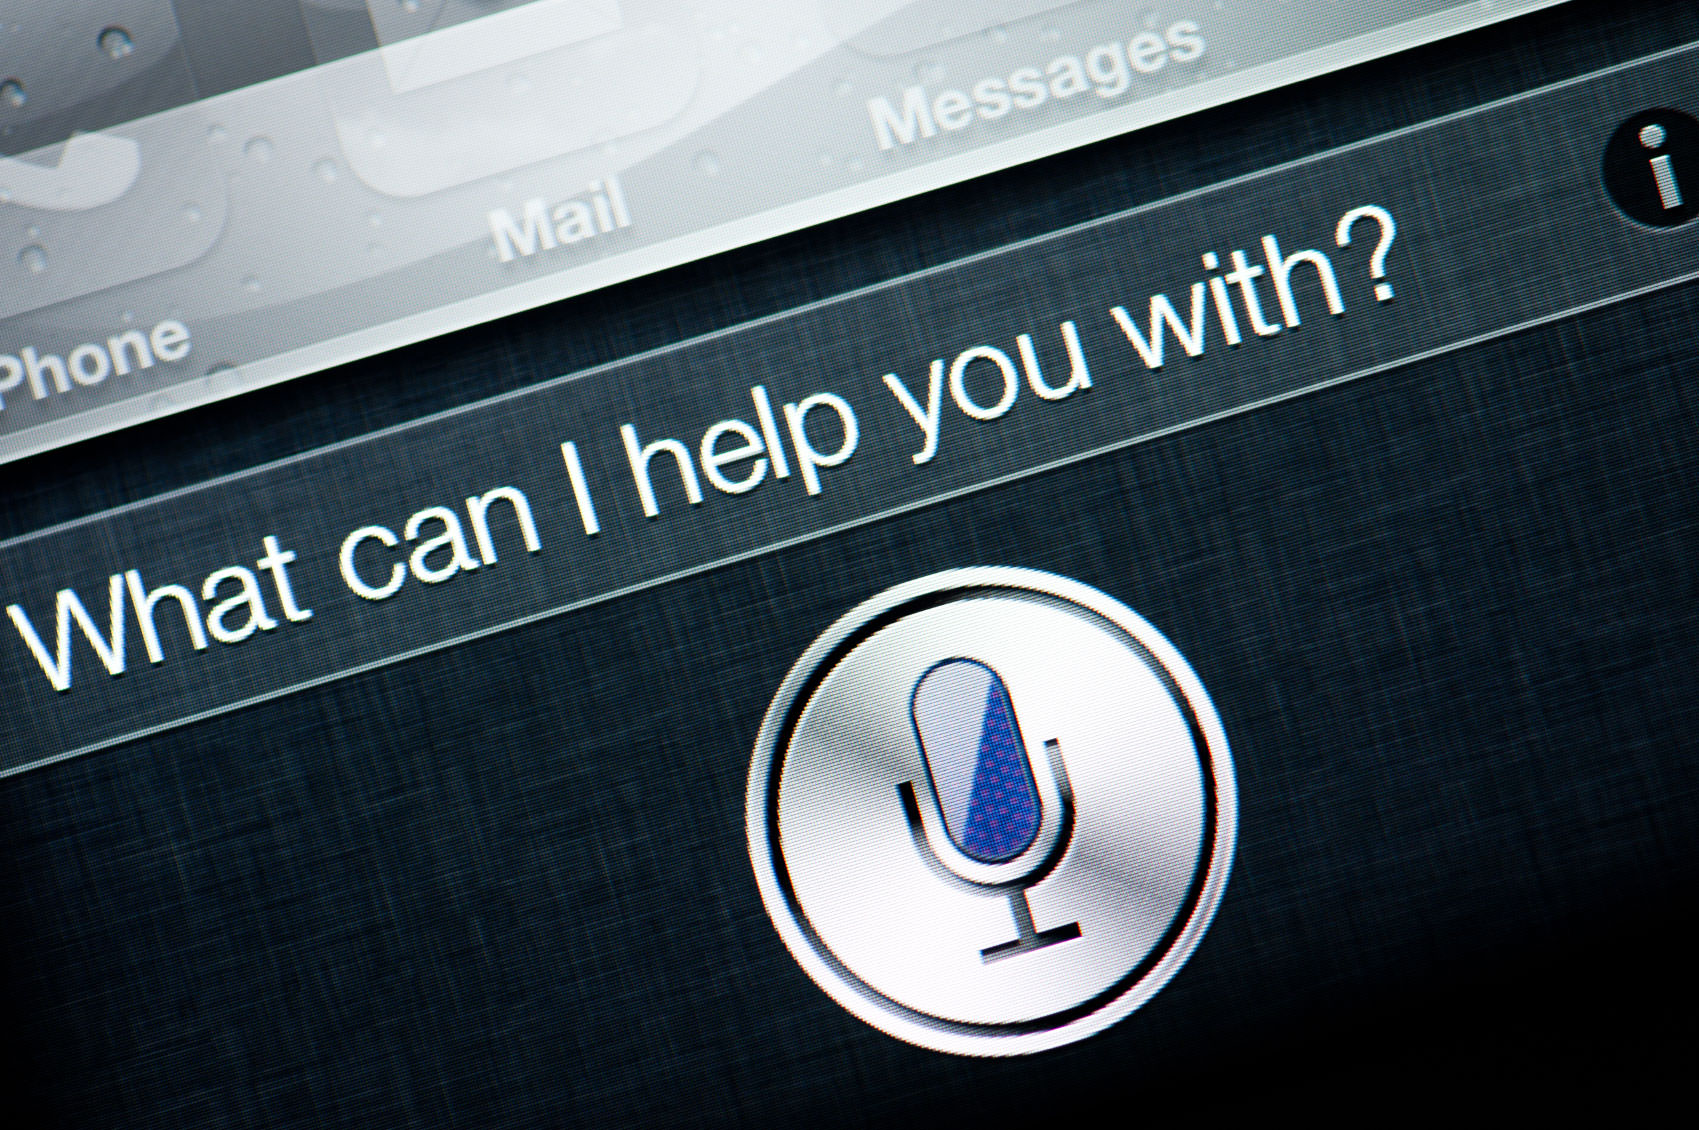 Apple, Siri, and Dealing With Failure